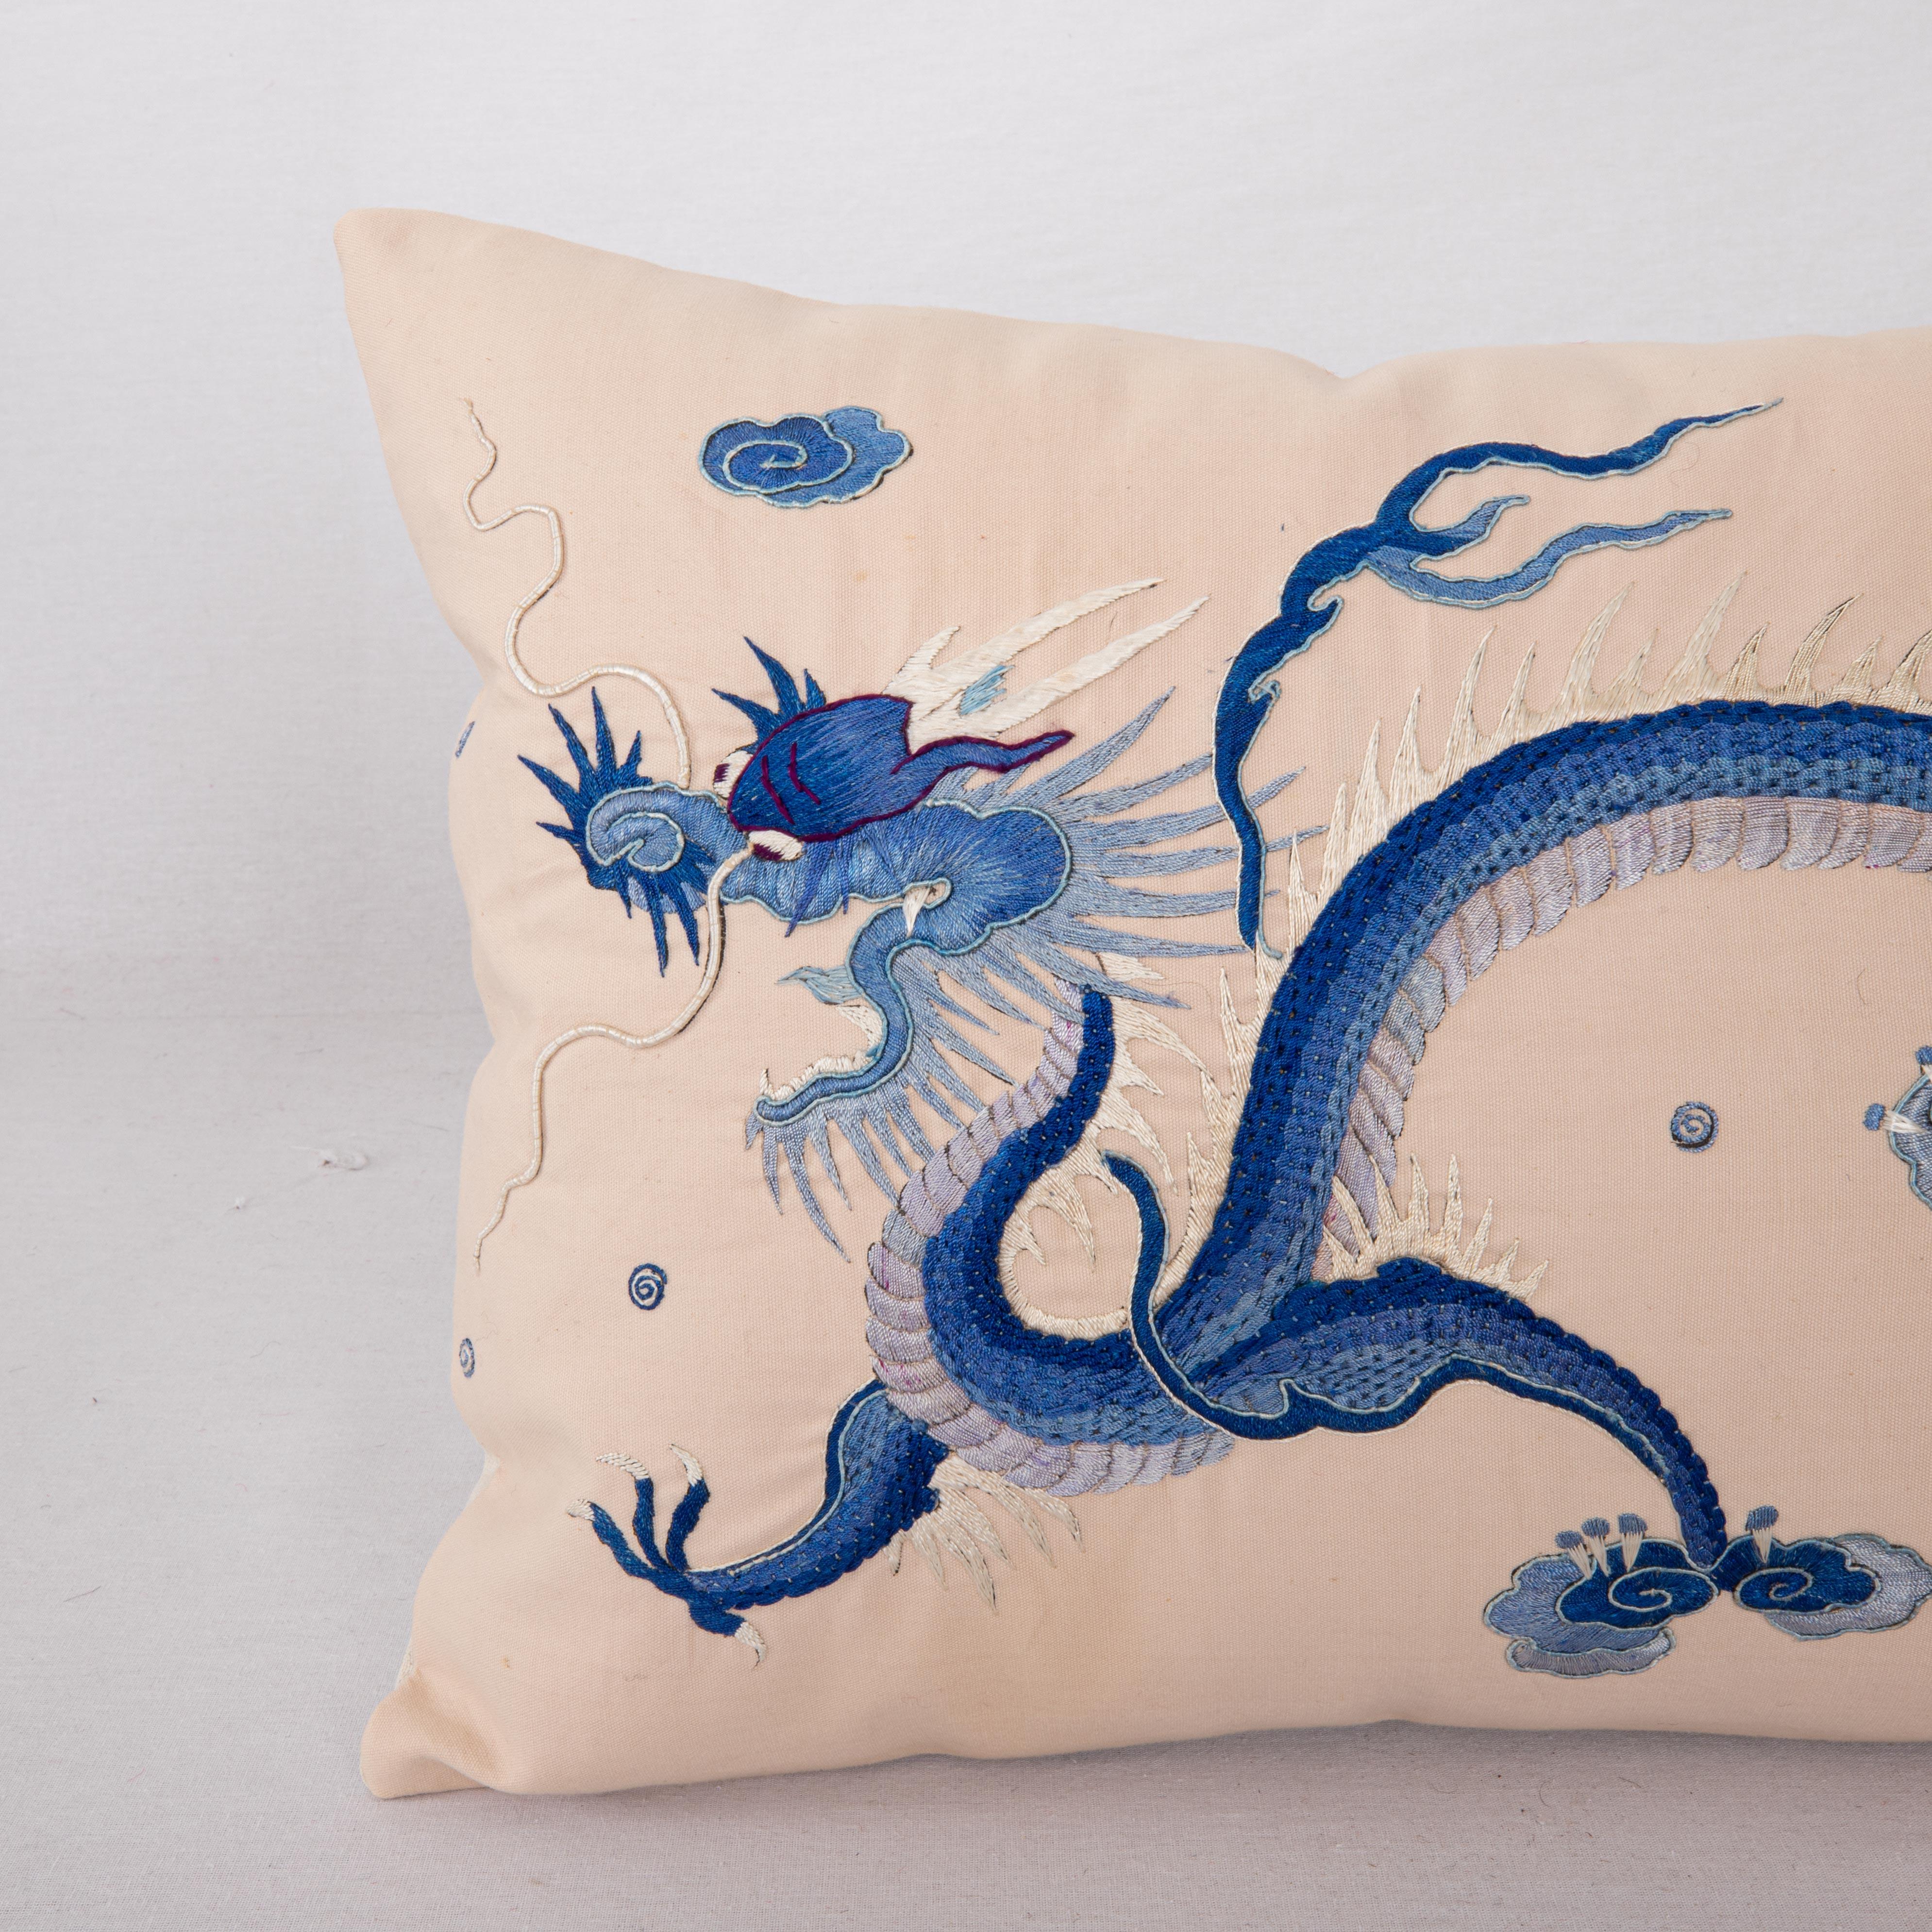 Chinese Pillow Case Made from a Vintage Asian Embroidery, Mid-20th Century